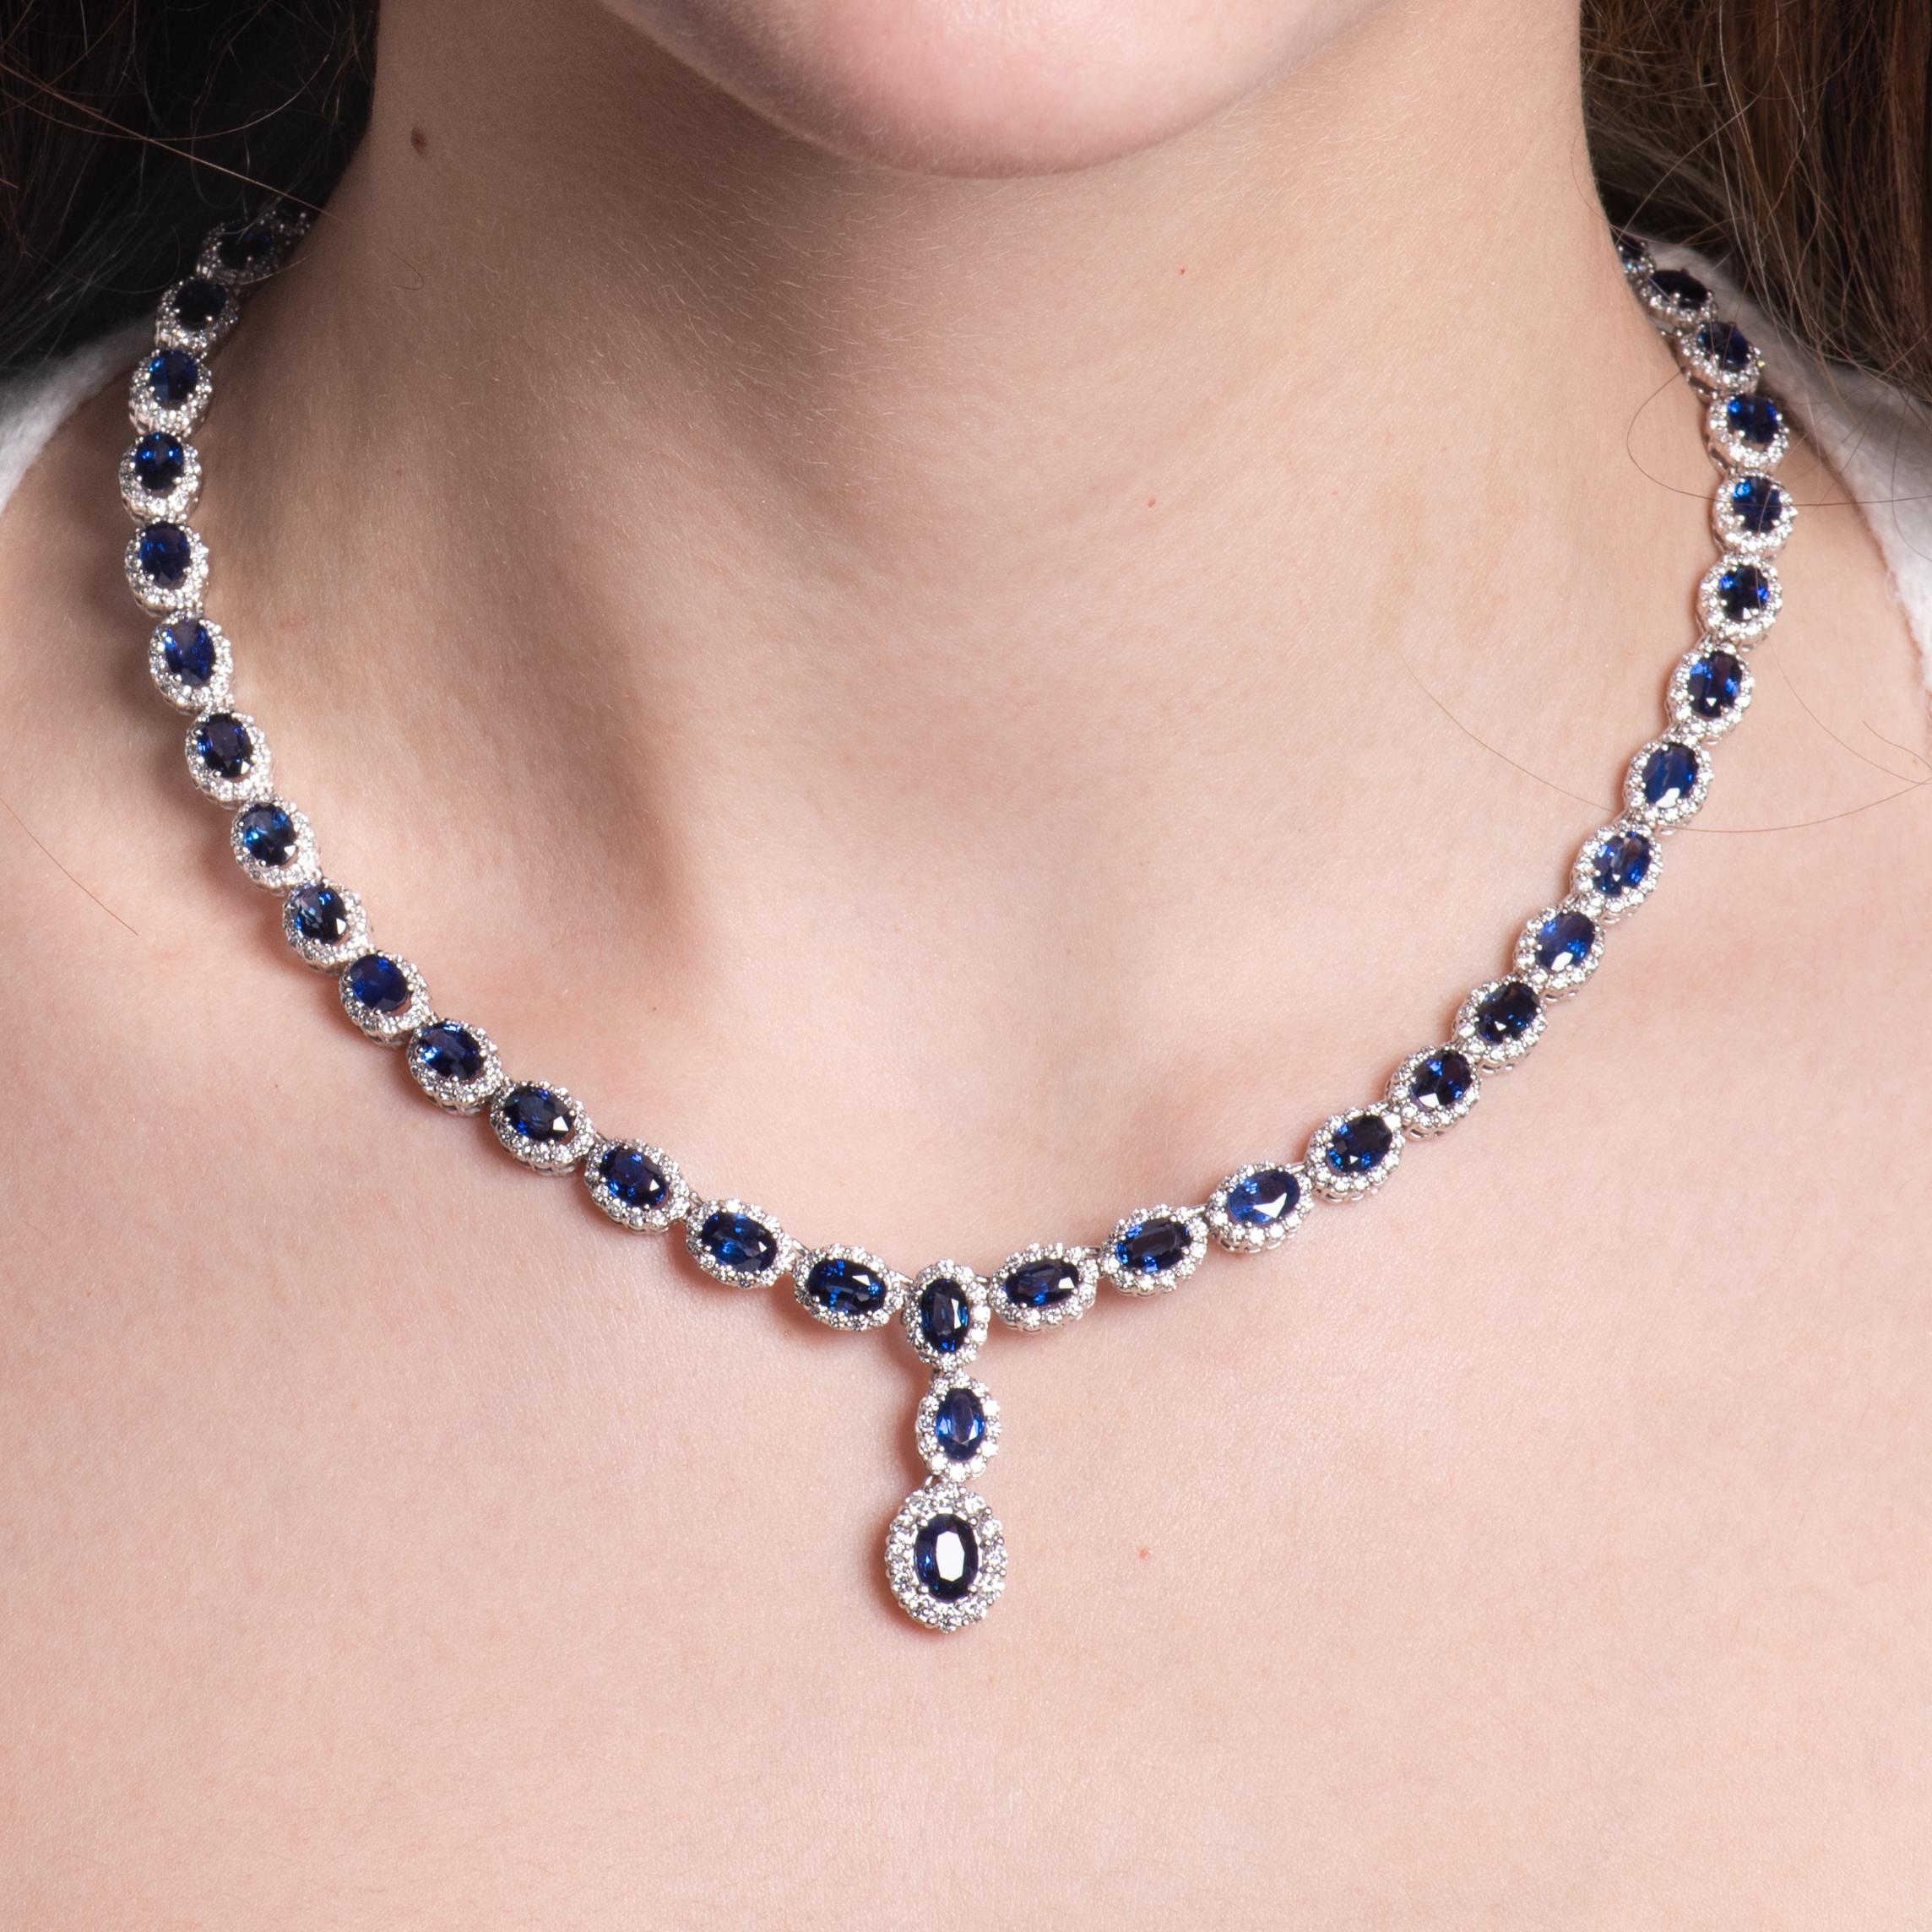 This exquisite necklace features 27.95ct total weight in oval cut sapphires of rich, royal blue hue, accompanied by round diamond halos with a total weight of 7.08ct. All the stones are set in a 16 inch 18kt white gold necklace. The stones go all